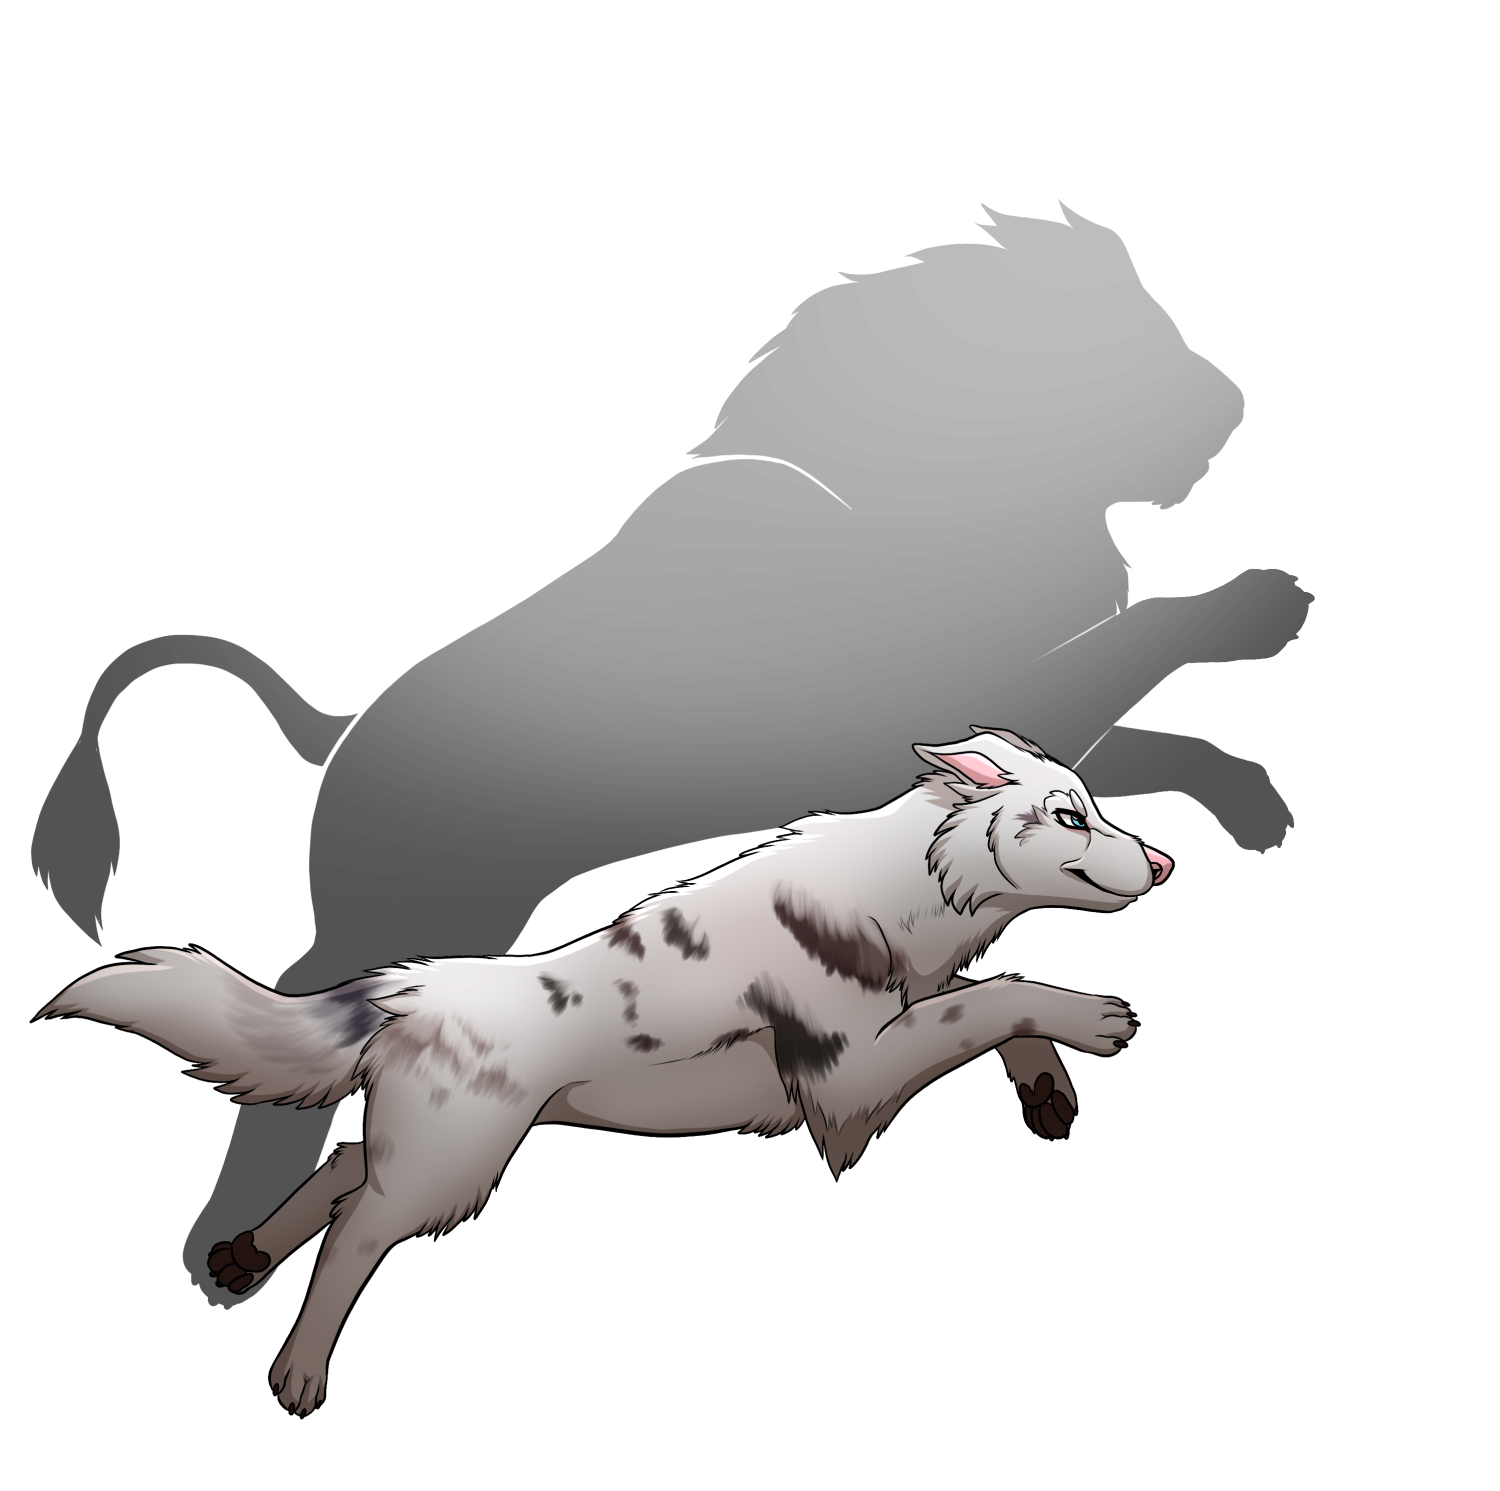 Project Cecil Save 1 for me Dog Rescue